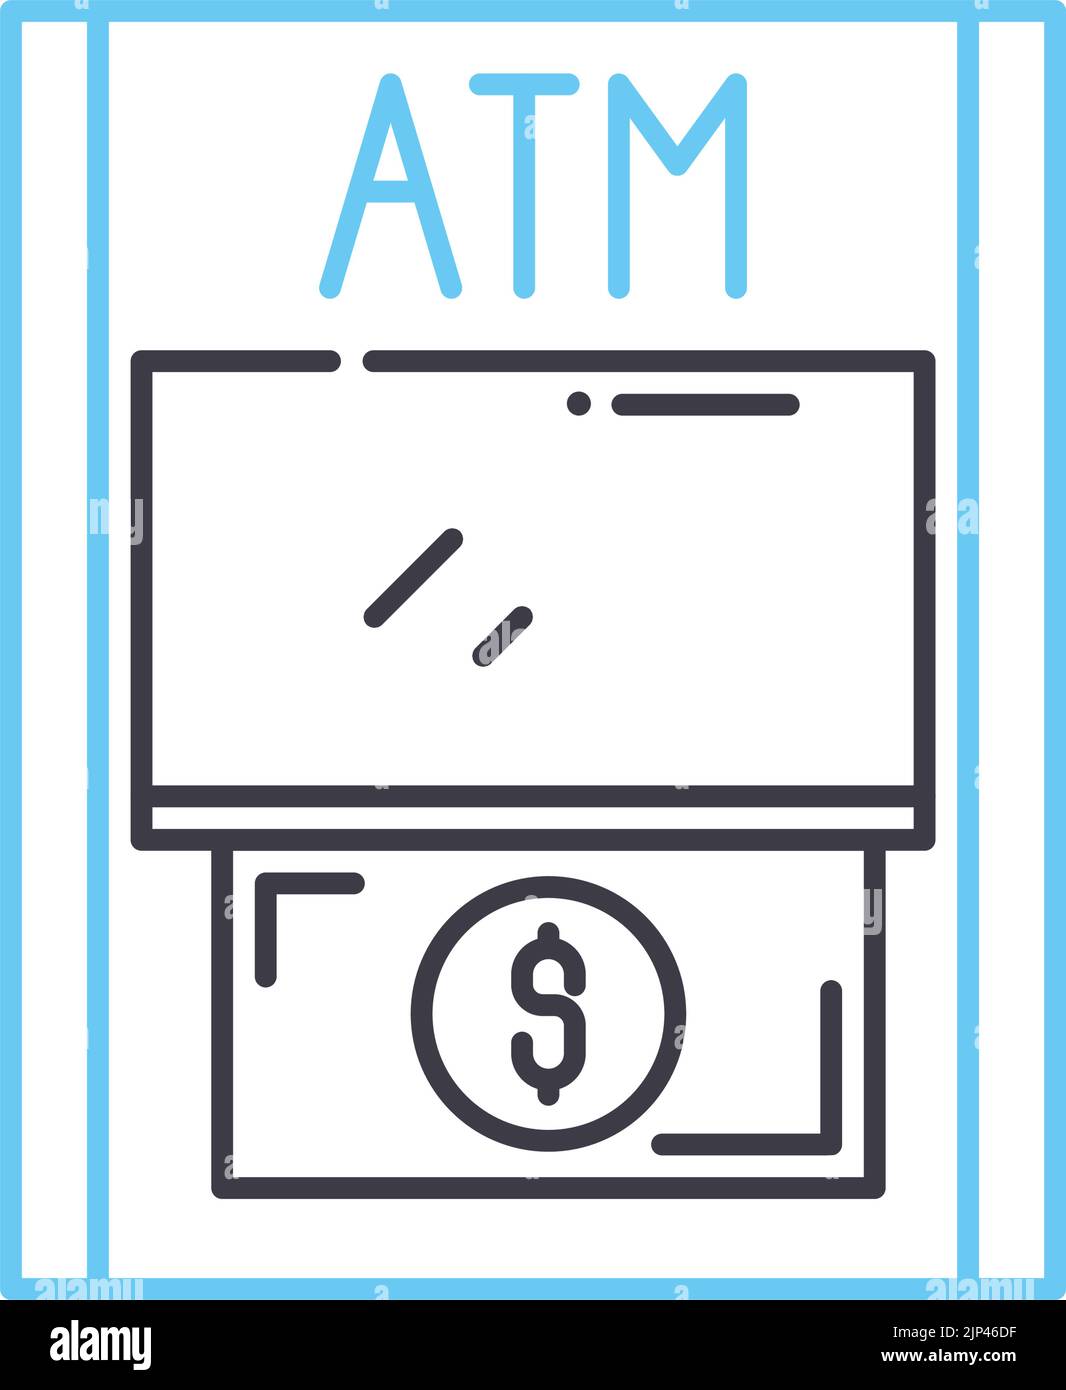 atm line icon, outline symbol, vector illustration, concept sign Stock Vector